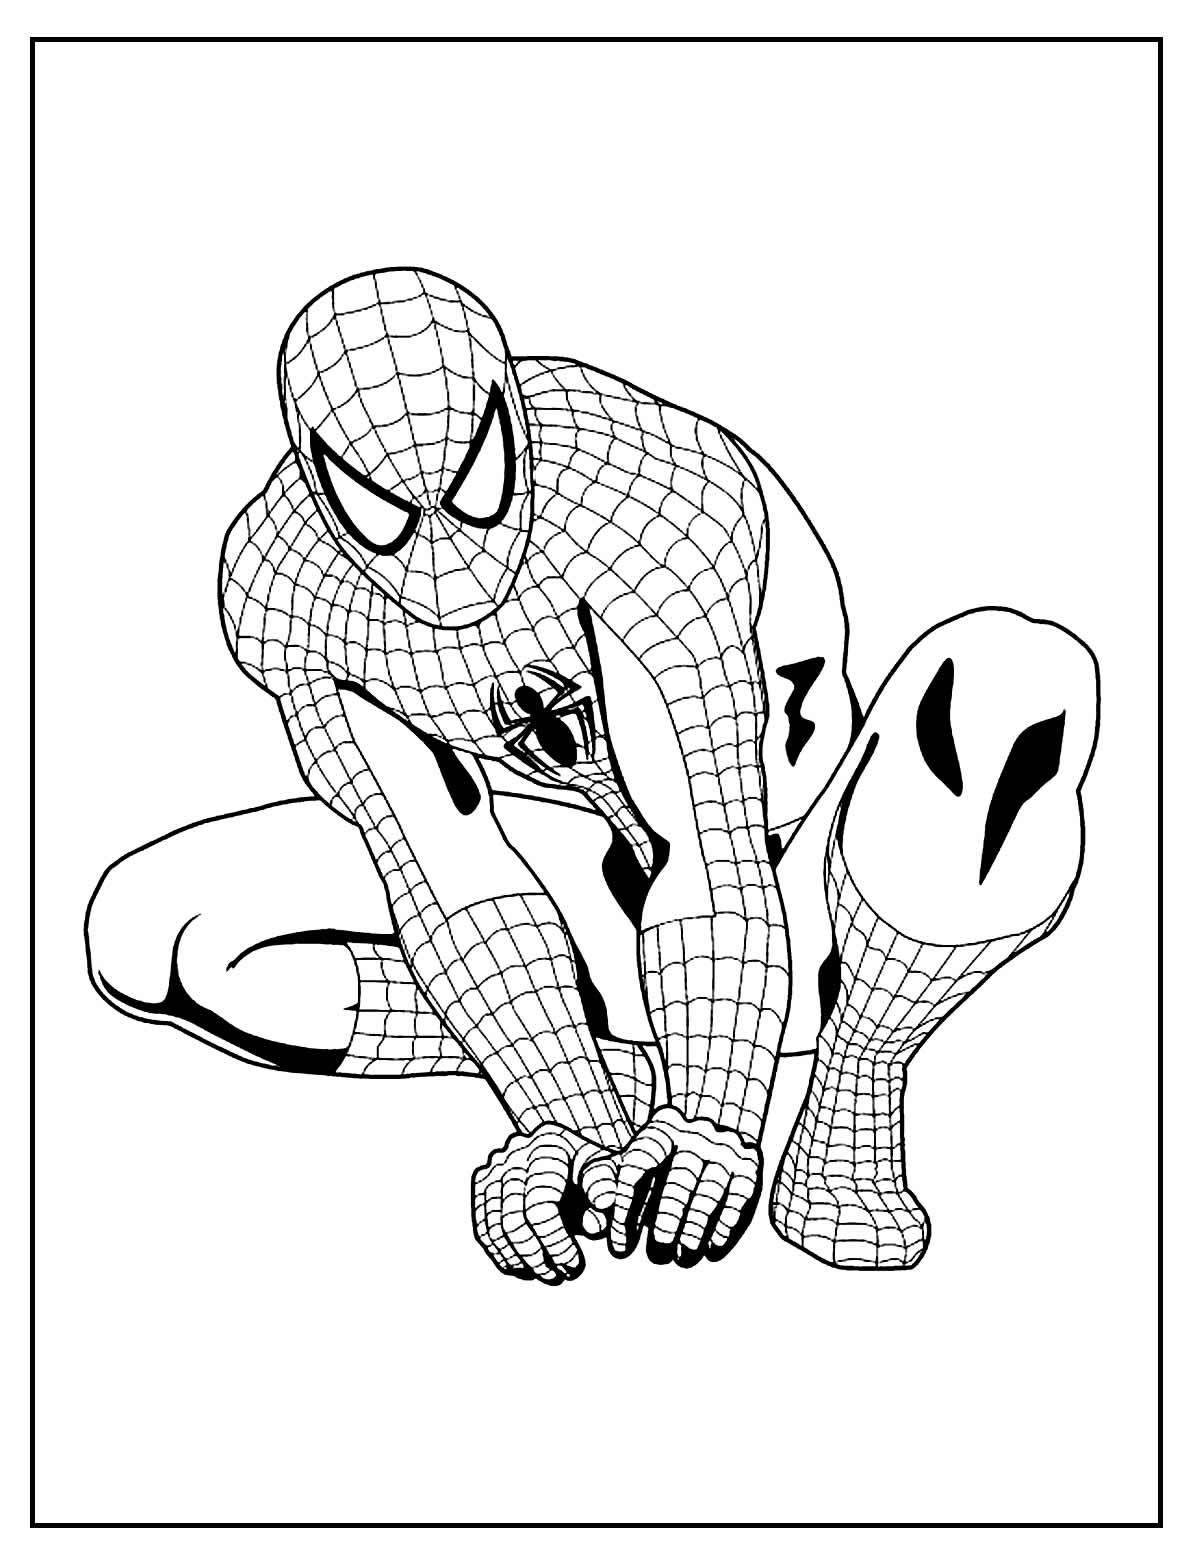 Spider-man colorful coloring book